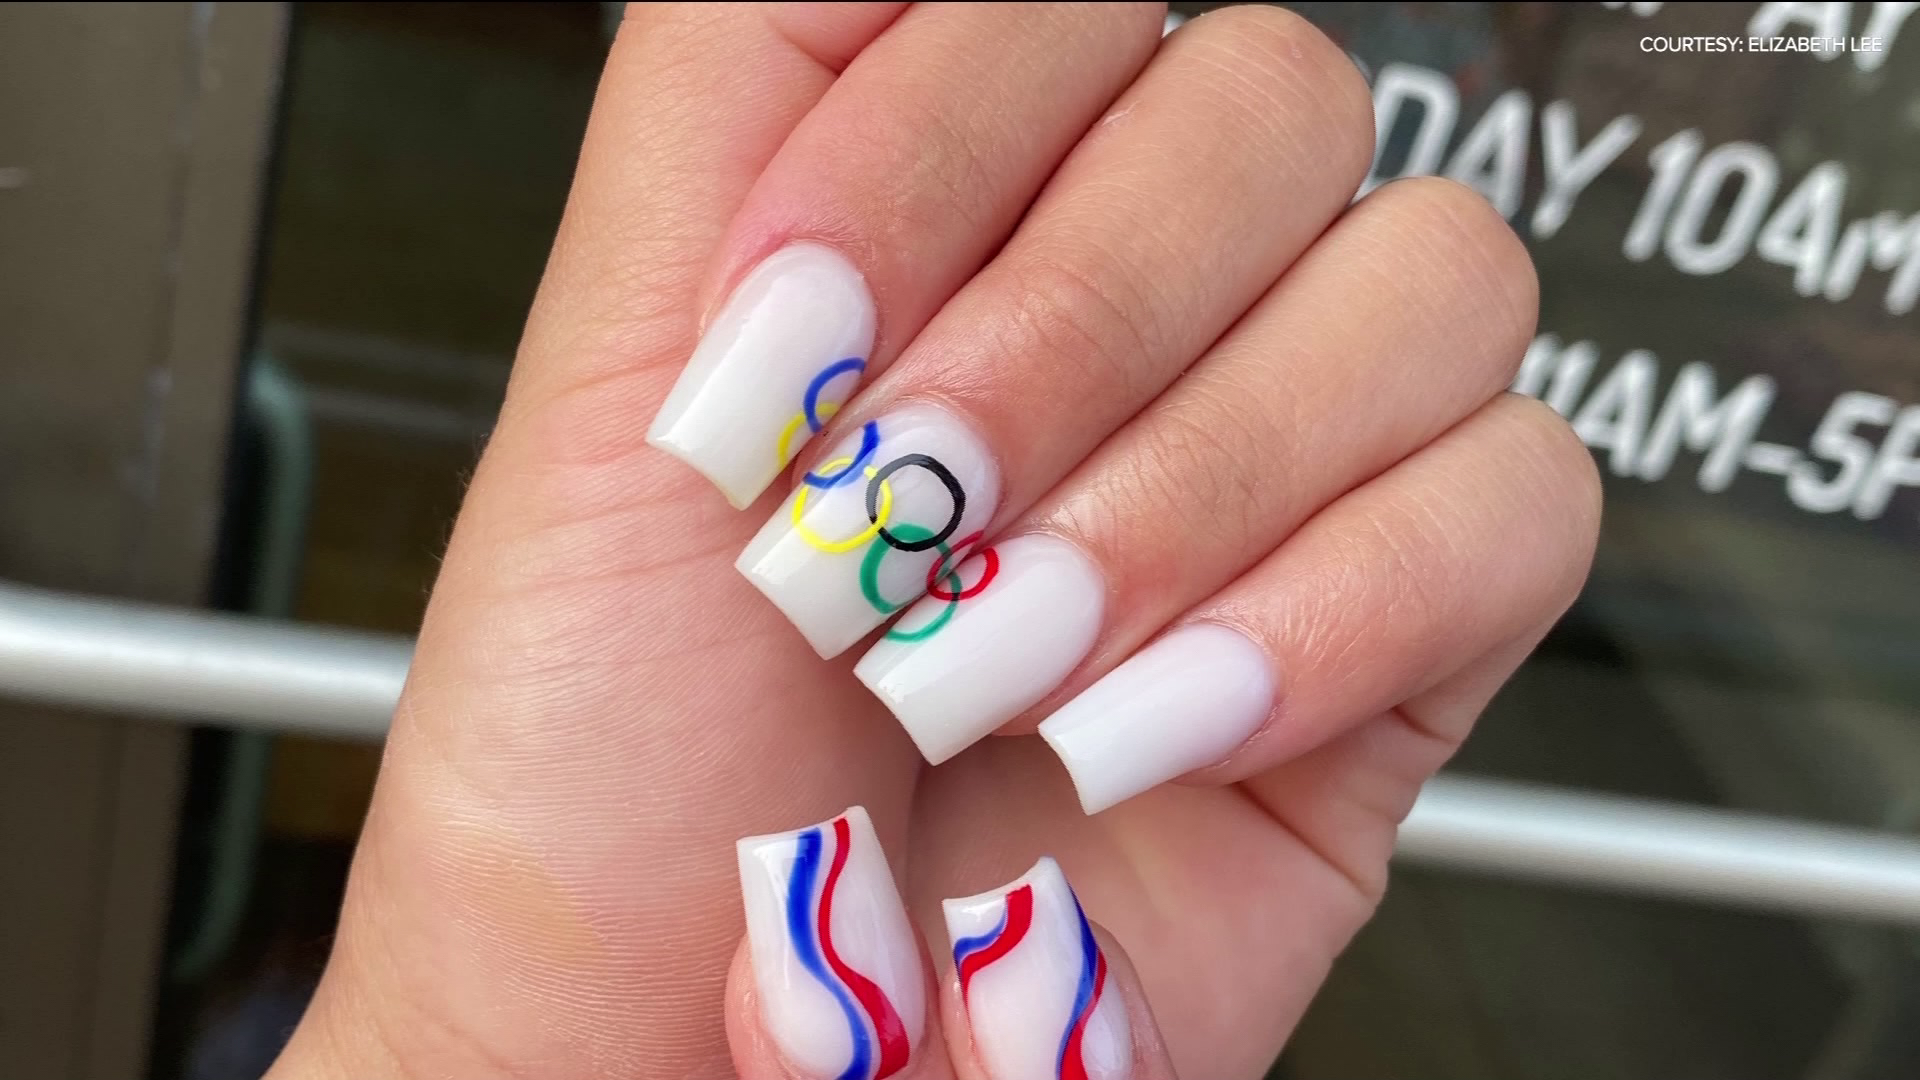 "I didn't think that her nails would become an internet sensation overnight," said Elizabeth Lee, who did Suni Lee's nails before she flew out for the Olympics.